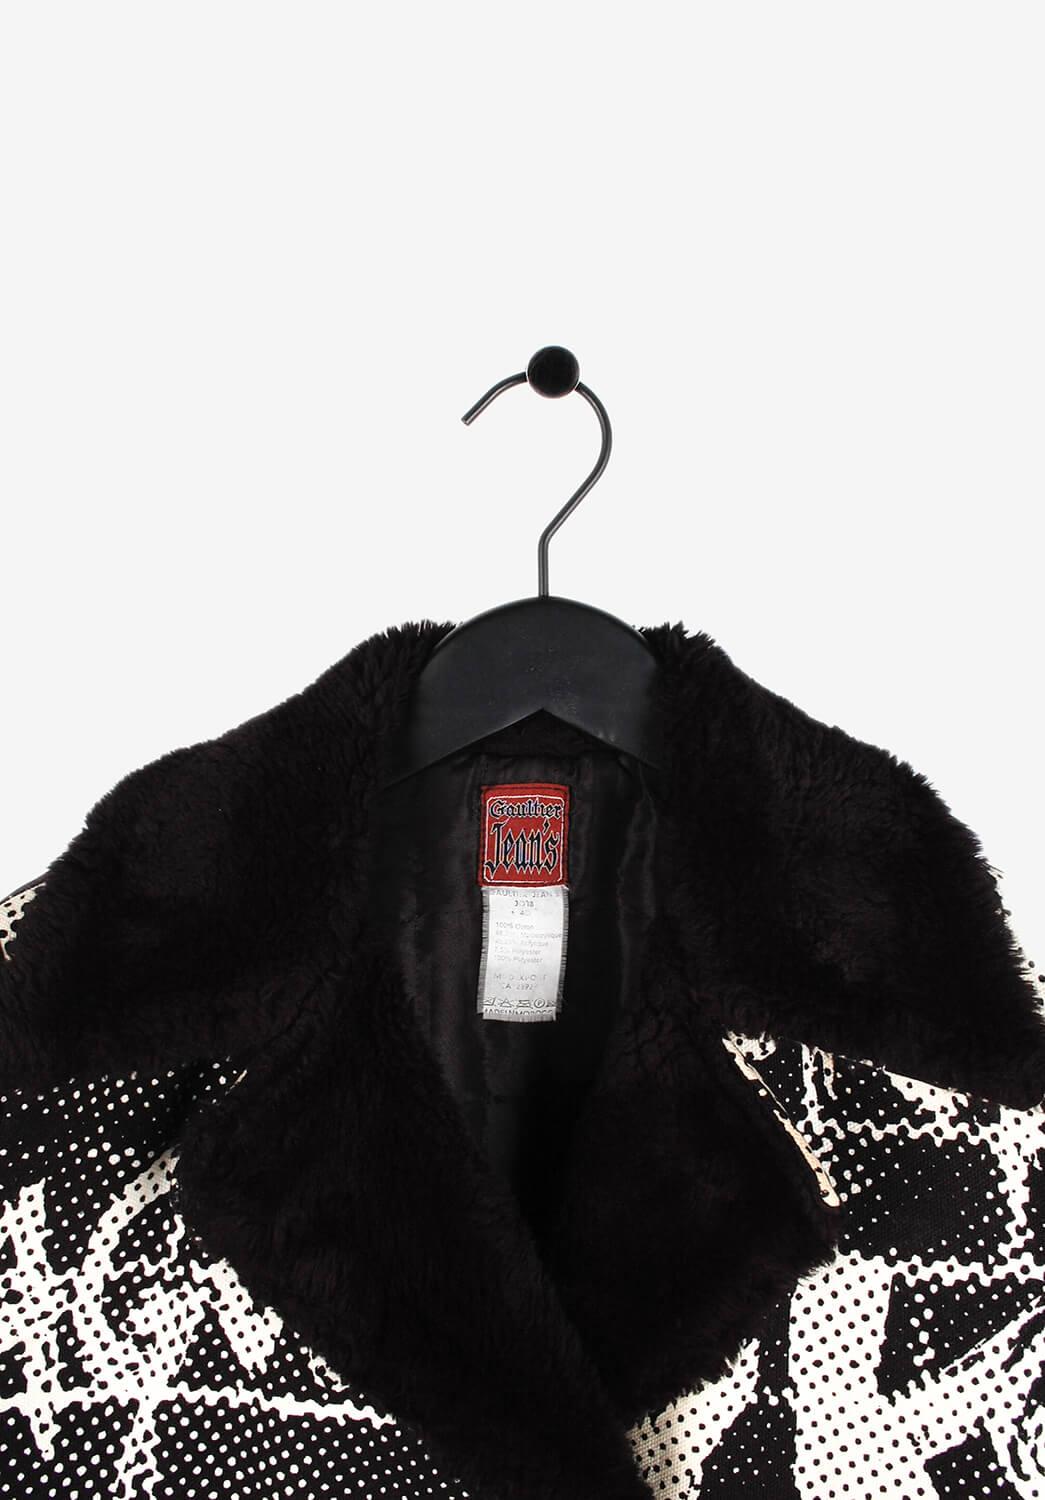 100% genuine Jean Paul Gaultier Men/Woman Coat (Unisex)
Color: Black/Beige
(An actual color may a bit vary due to individual computer screen interpretation)
Material: 100% cotton
Tag size: 40 women M, Mens-S
This coat is great quality item. Rate 8.5